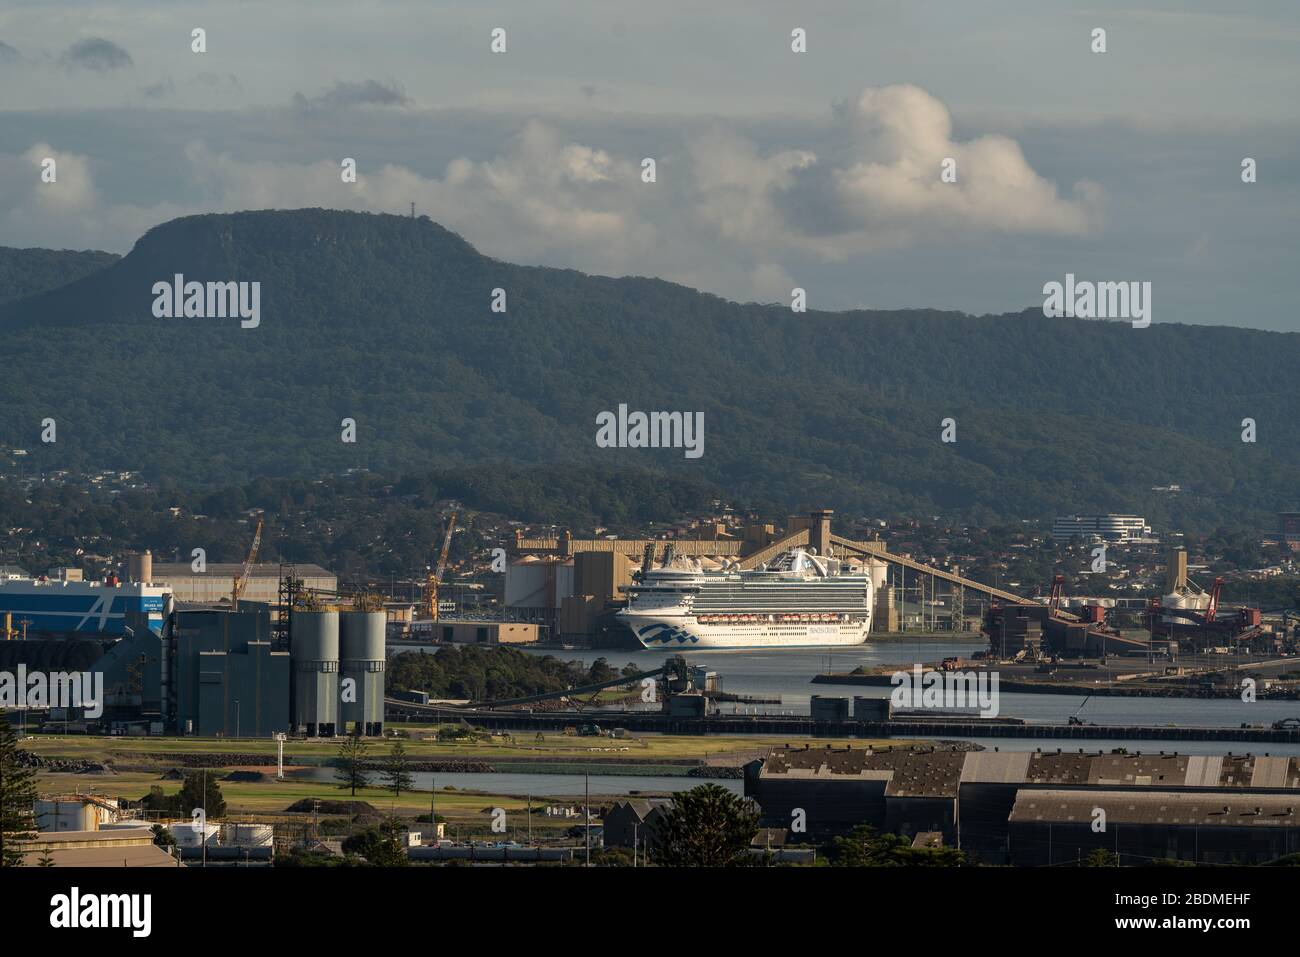 Port Kembla, NSW, Australia - April 9, 2020 Ruby Princess cruise ship with crew infected with COVID-19 docked in Port Kembla Harbour Stock Photo